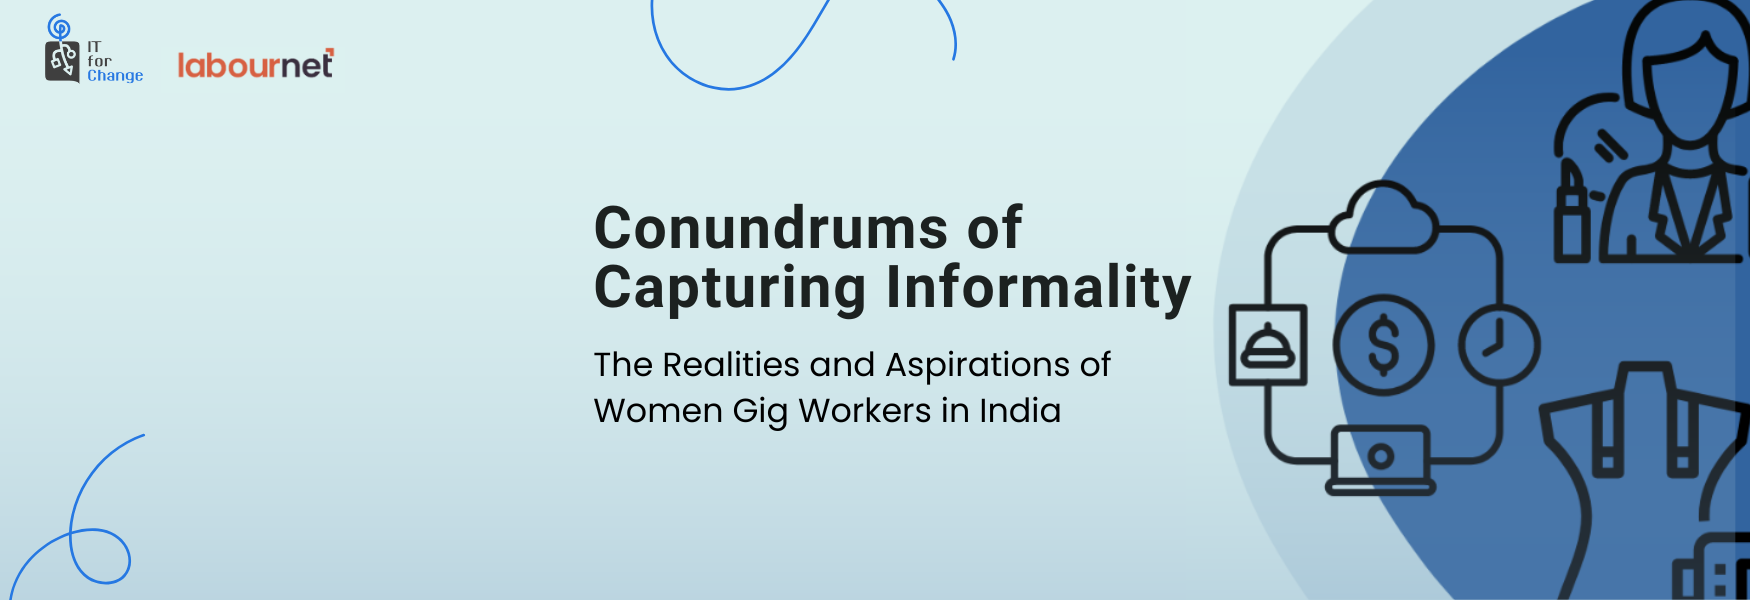 Conundrums of Capturing Informality: The Realities and Aspirations of Women Gig Workers in India